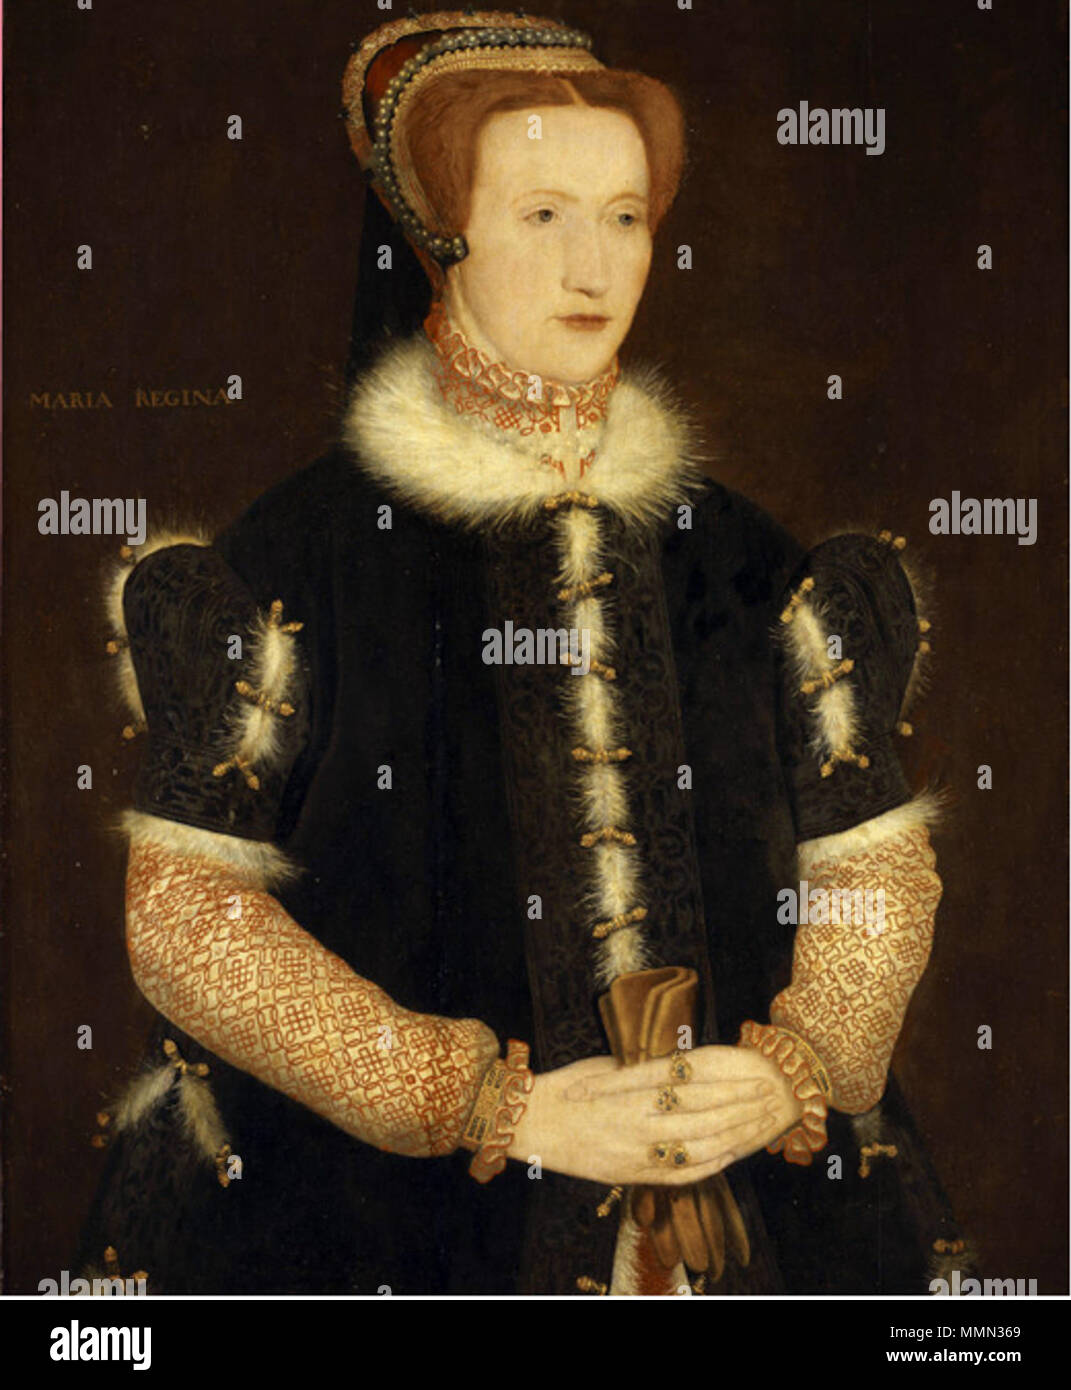 . Bess of Hardwick (later Elizabeth Countess of Shrewsbury) when Mistress St Lo, 1550s. A later inscription incorrectly identifies her as Mary I.  . 1550s. Unknown 82 Bess of Hardwick as Mistress St Lo Stock Photo